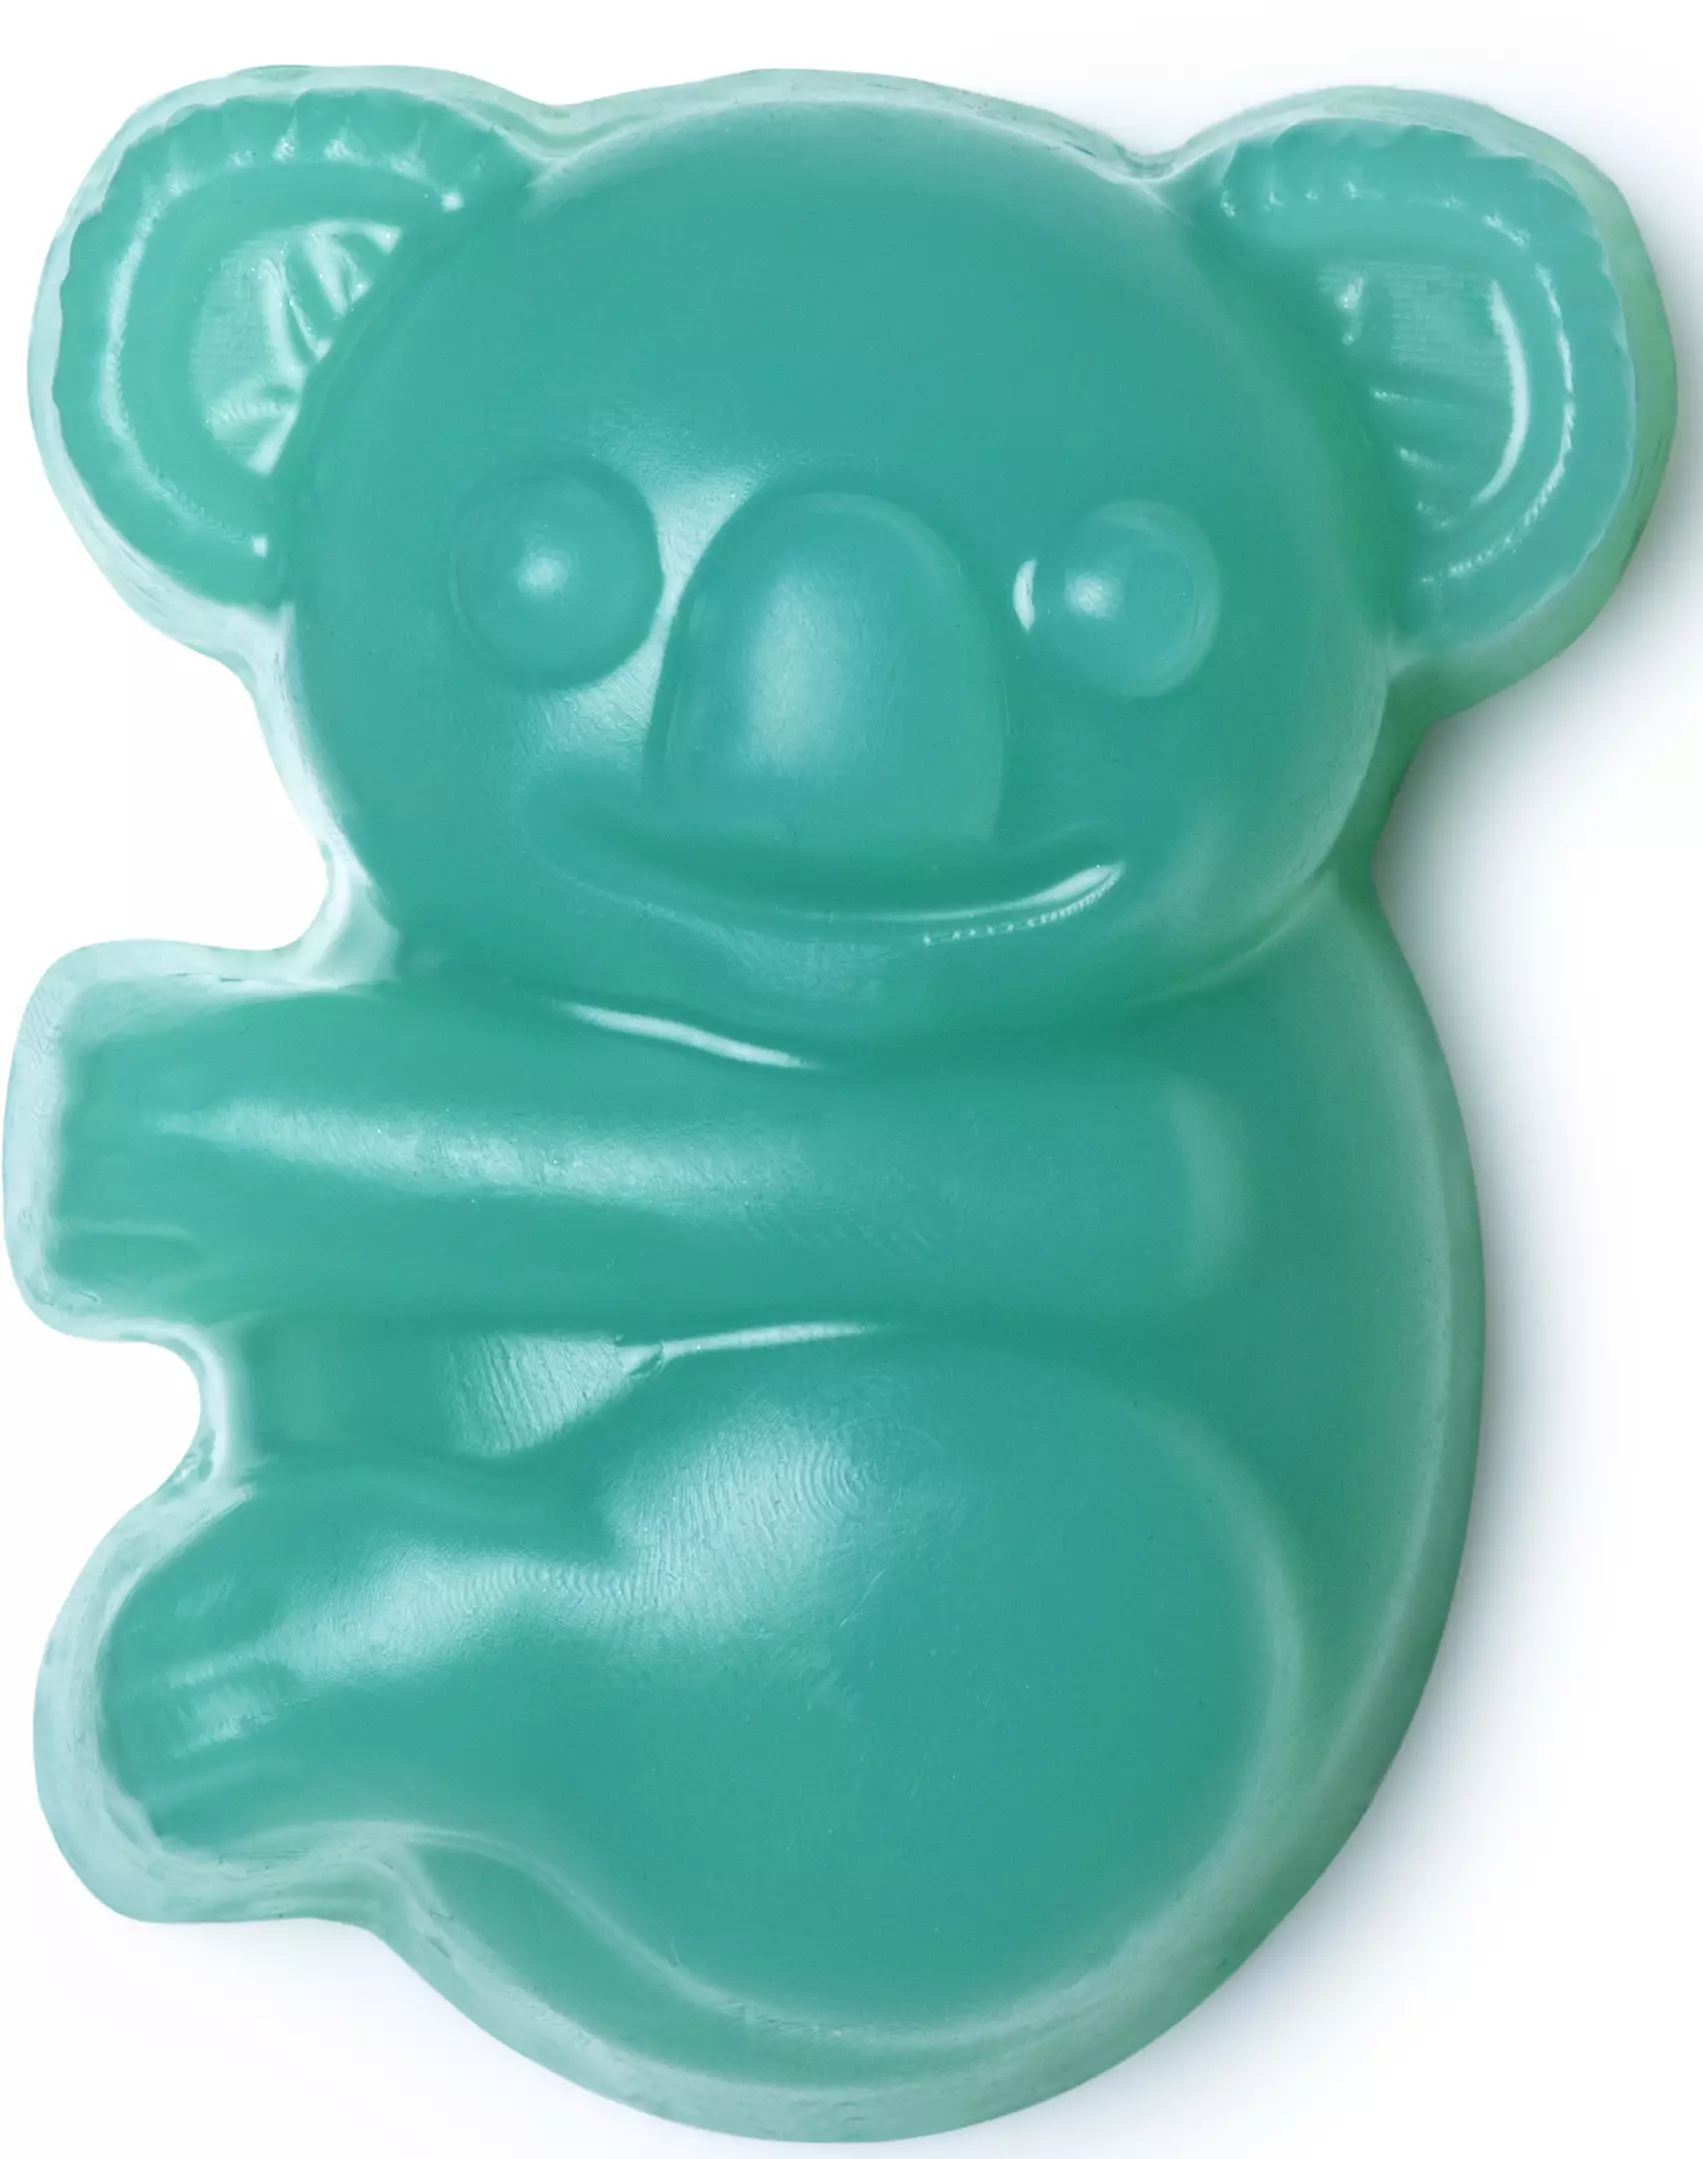 The koala-shaped soap will cost £5 and all proceeds will go to the Bush Animal Fund (